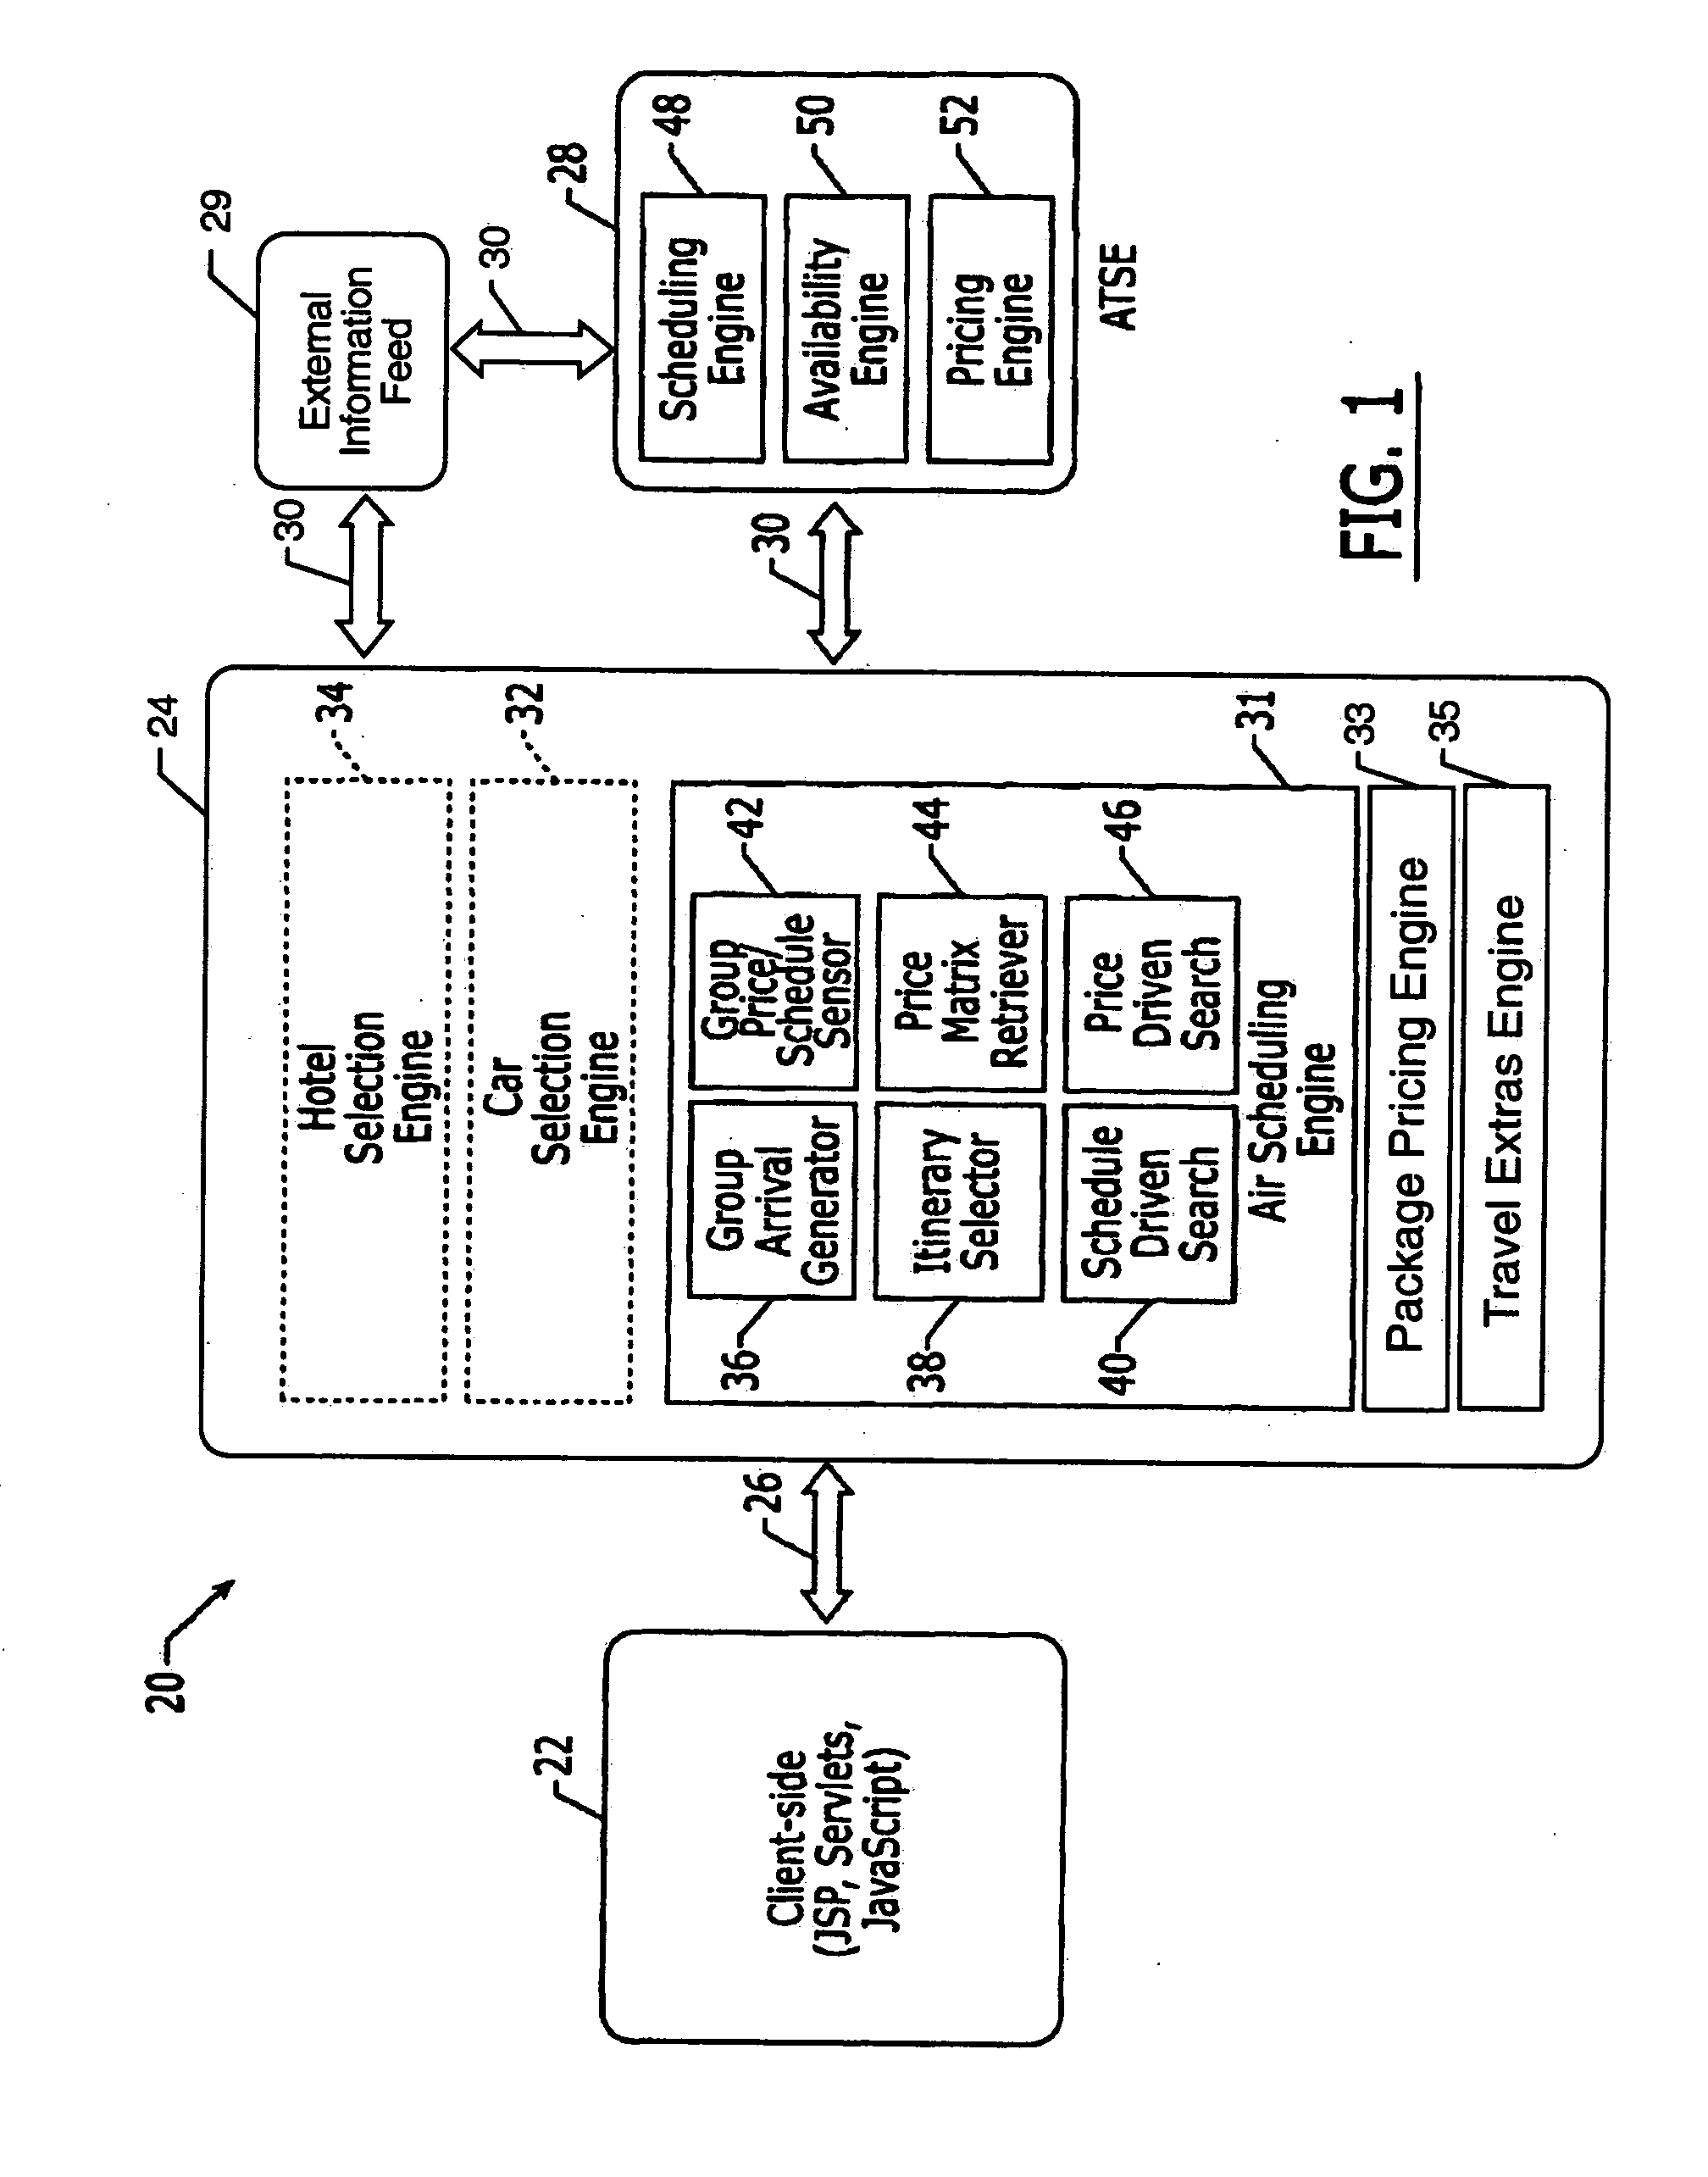 System and method for coordinating travel itineraries